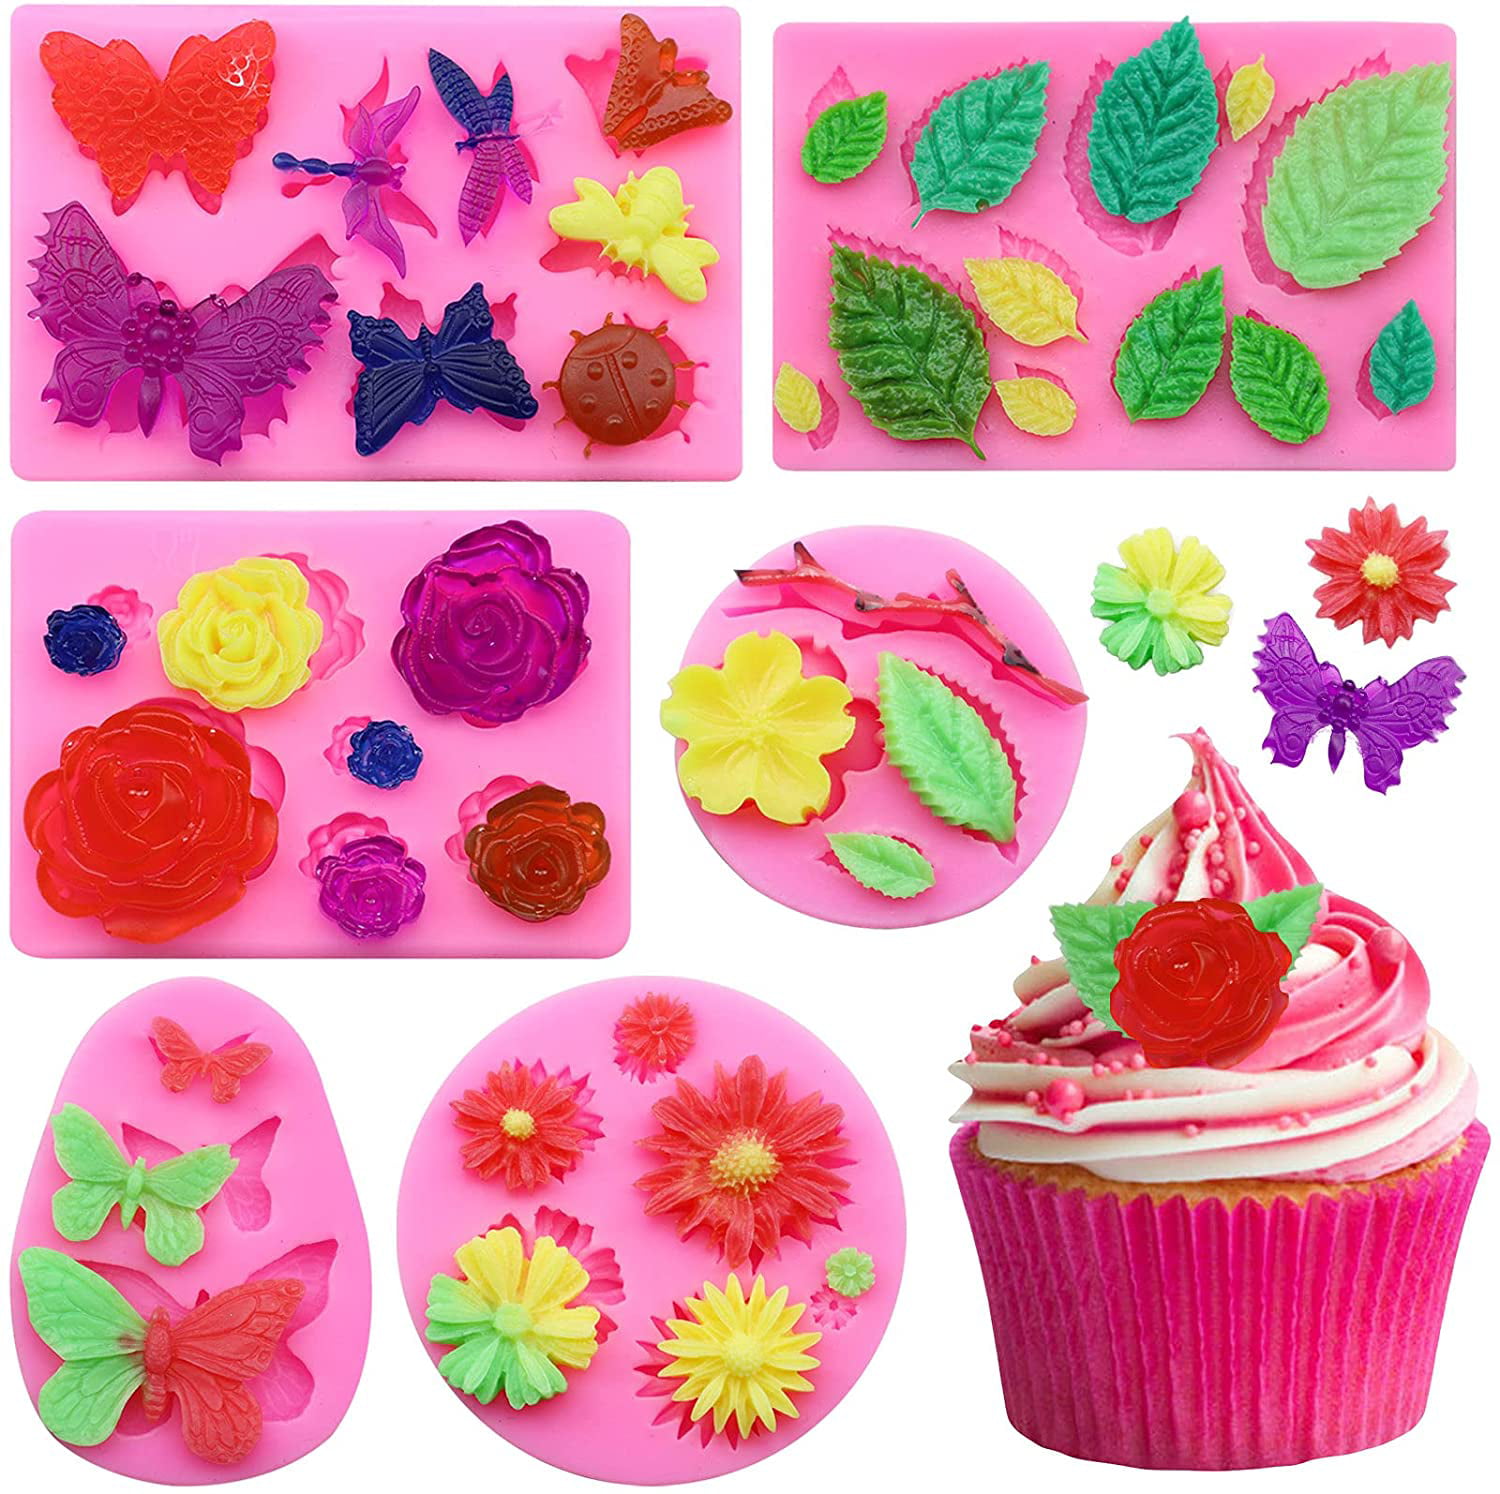 3D daisy silicone baking mold cup cake muffin jelly dessert chocolate party i 